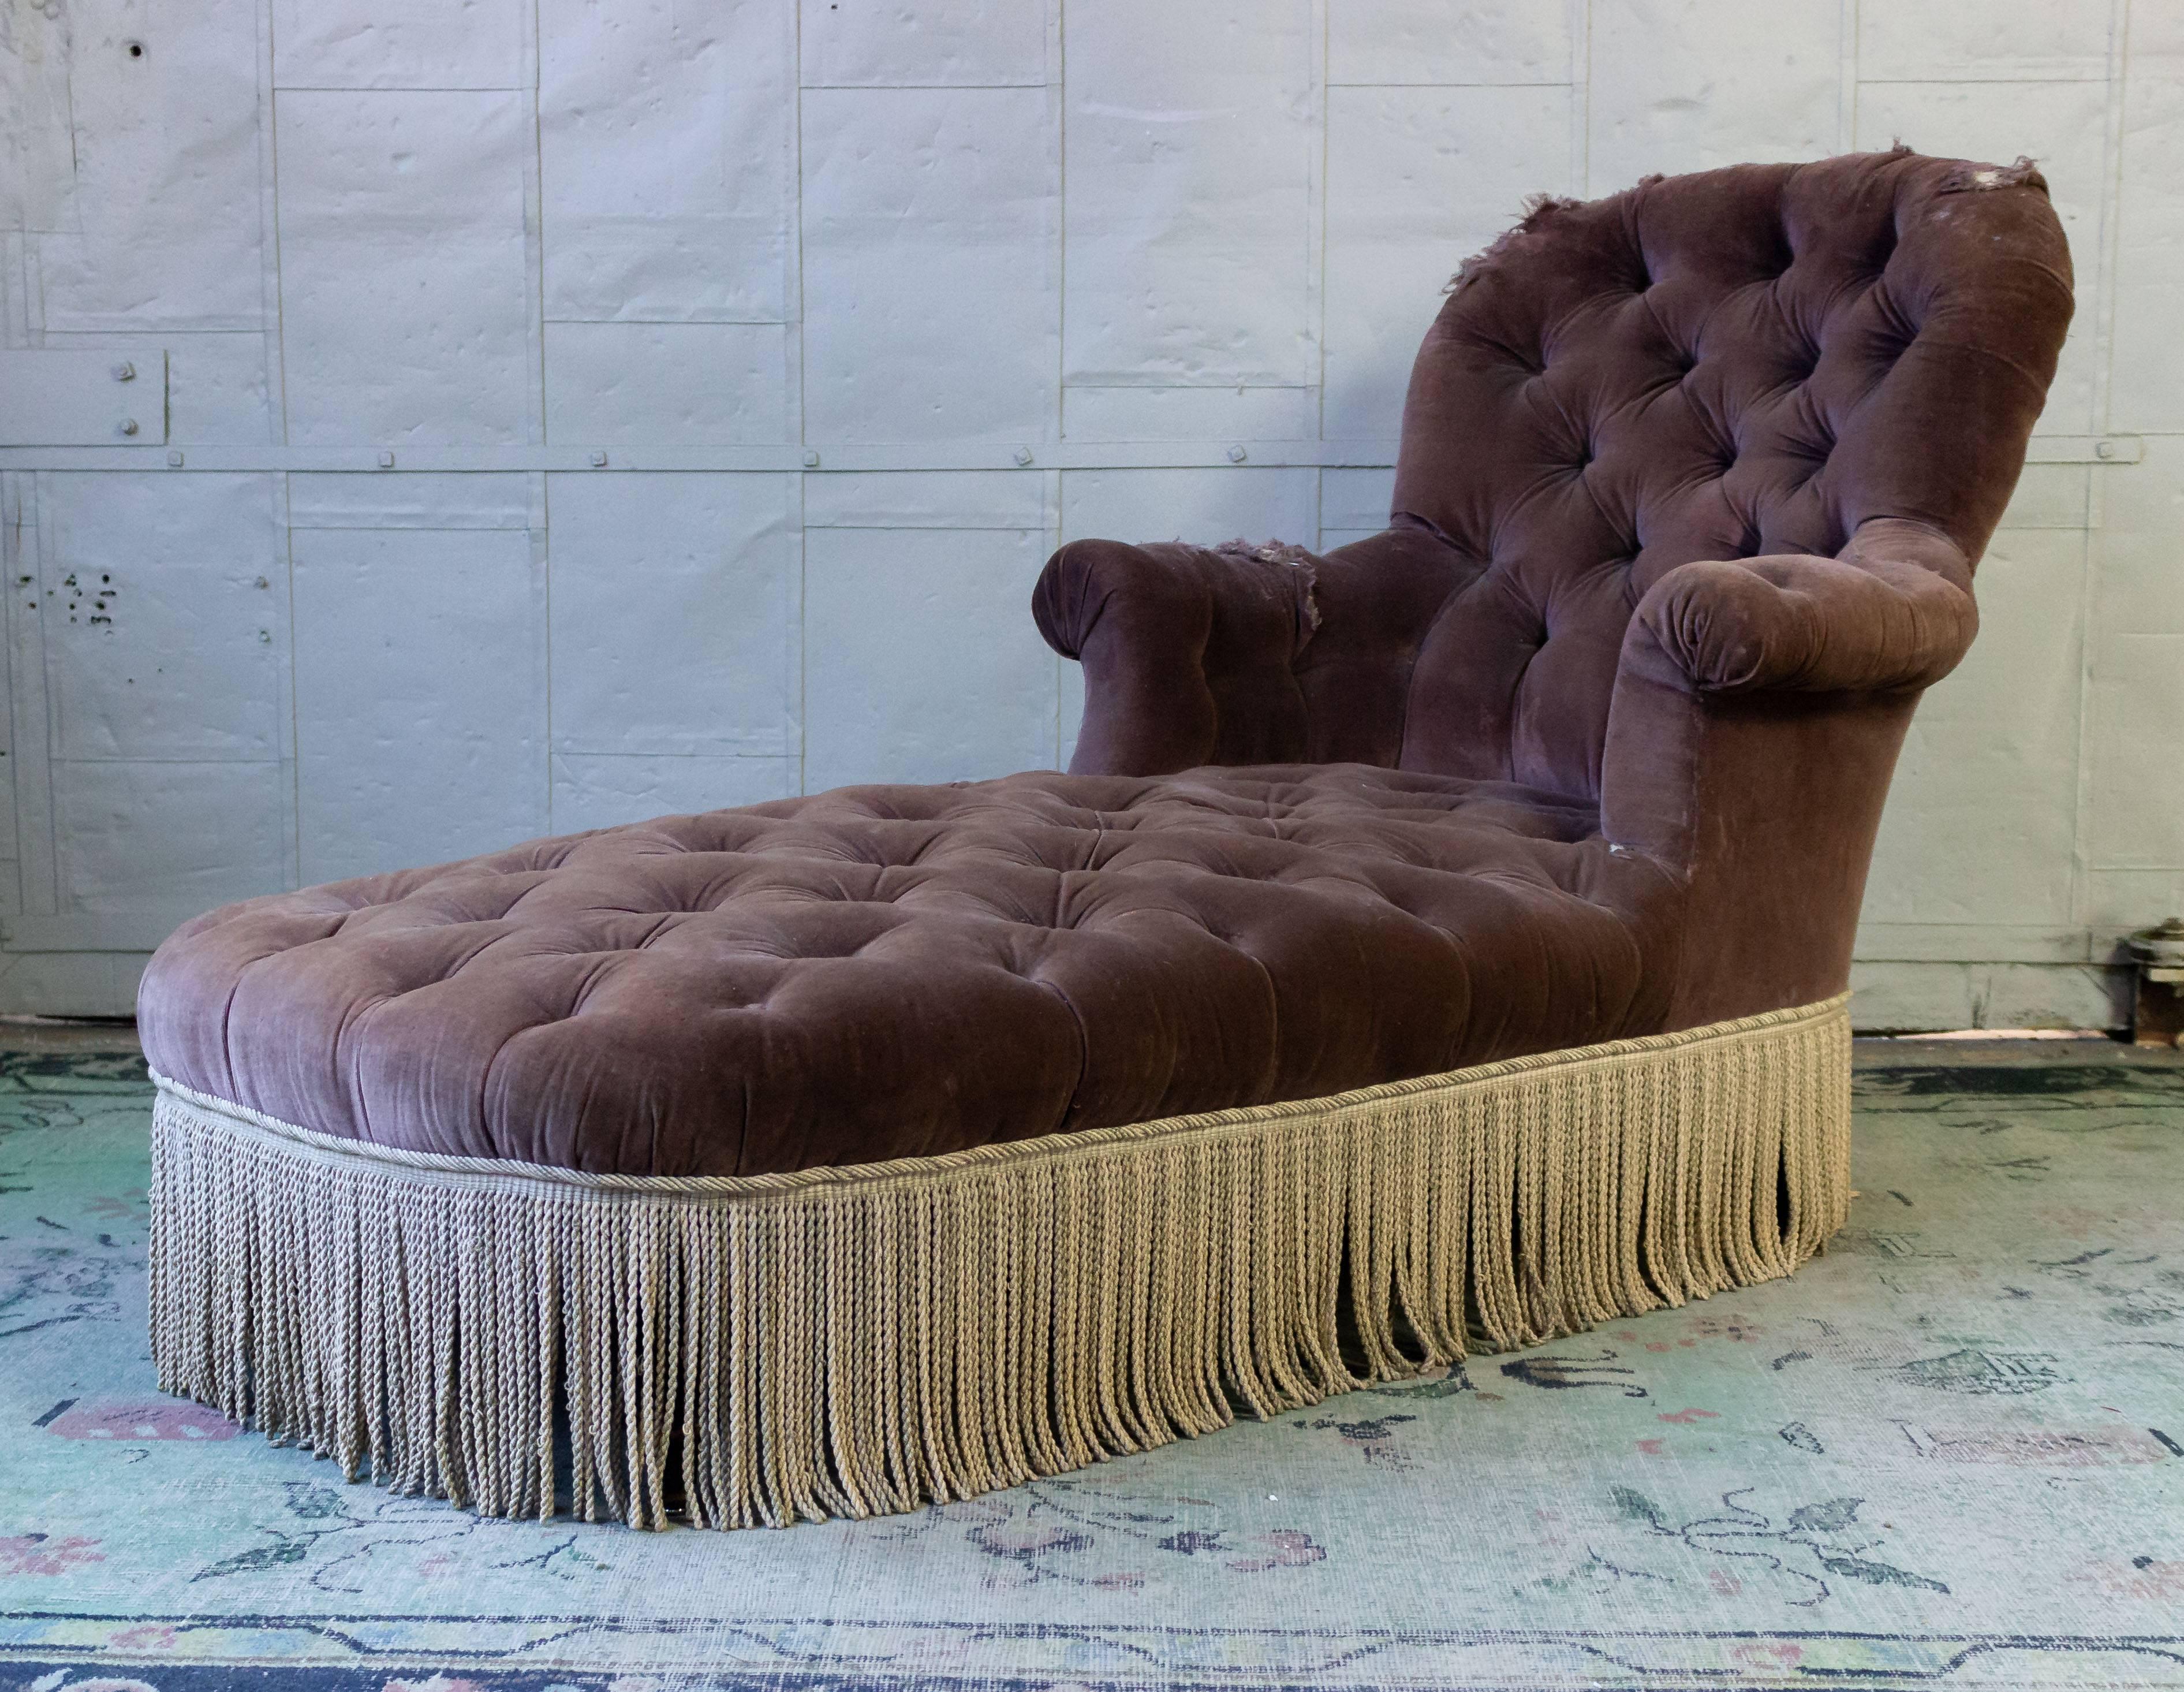 An exceptional French Napoleon III chaise longue. Bring a touch of elegance to your home with this exquisite French 19th century Napoleon III chaise longue. The worn and tattered purple velvet is rich in texture, complemented perfectly by the